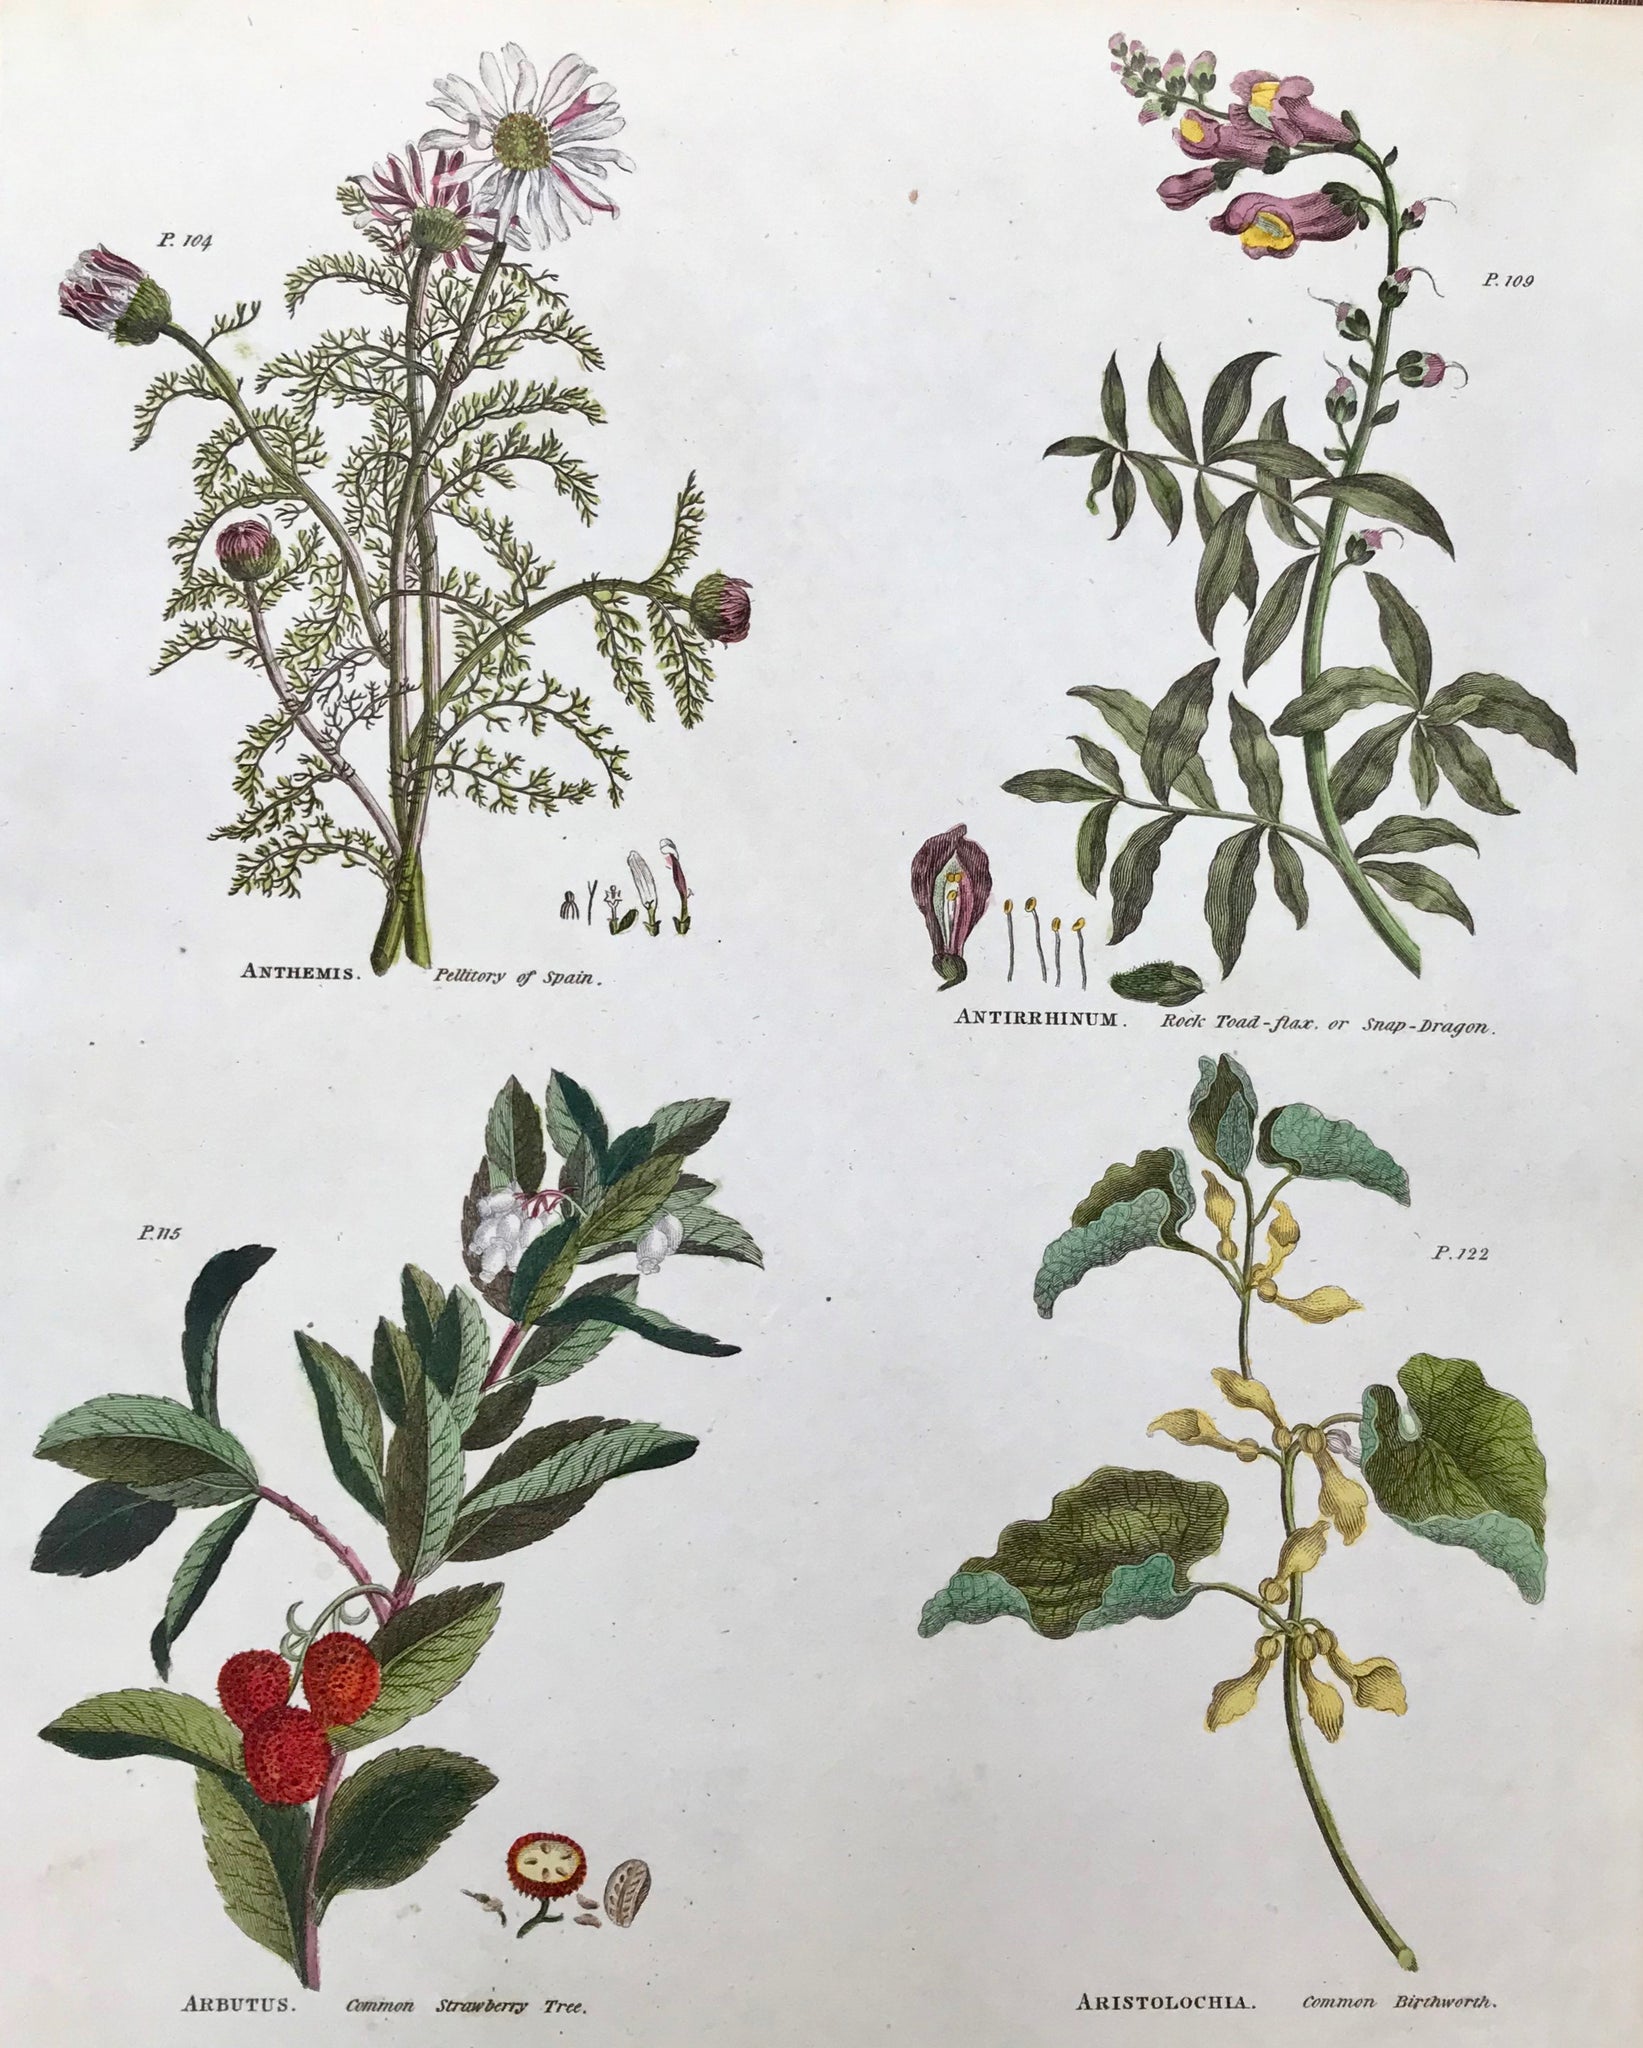 Upper left: Anthemis Pellitory of Spain Upper right: Antirrhinum Rock Toad Flax or Snap Dragon Lower Left: Arbutus Common Strawberry Tree Lower right: Aristolochia Common Birthwort      Antique Botanical Prints from  "The Universal Herbal" by Thomas Green.  The complete title of this accurately and absolutely delightfully hand-colored work is: "The Universal Herbal", or Botanical, Medical, and Agricultural Dictionary, containing an Account of all the known Plants in the World arranged according to the